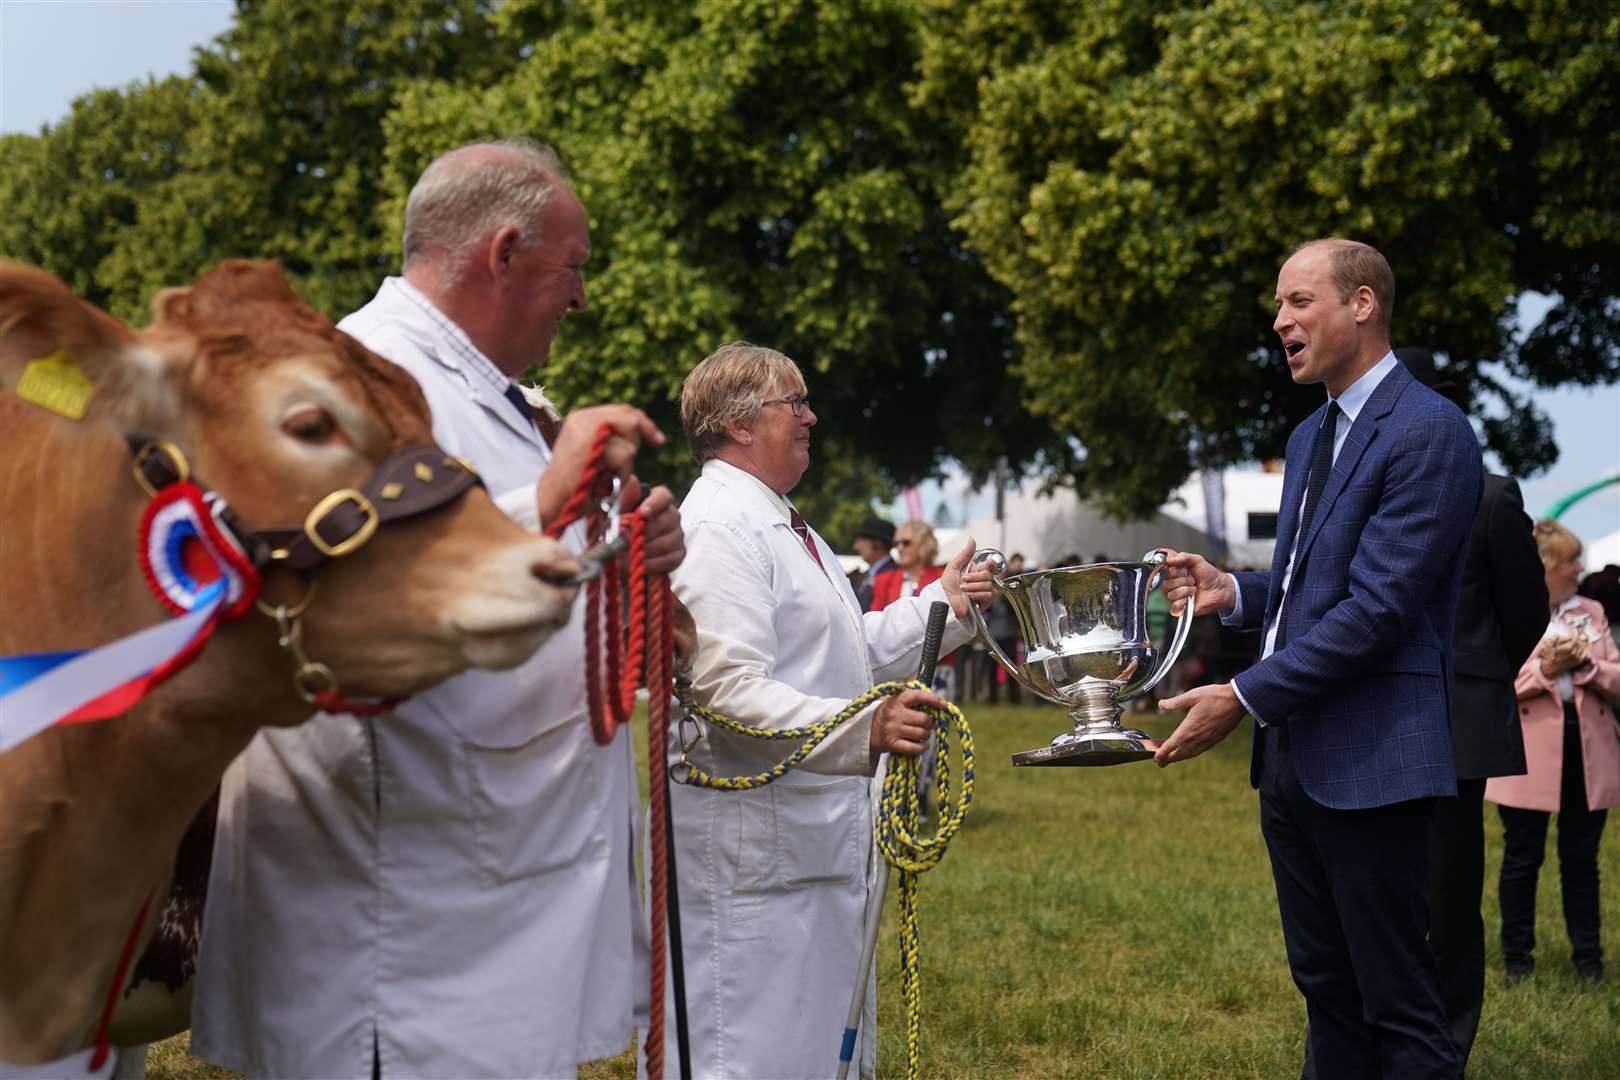 The Prince of Wales hands out awards to cattle handlers as he attends the Royal Norfolk Show at the Norfolk Showground in Norwich (Joe Giddens/ PA)